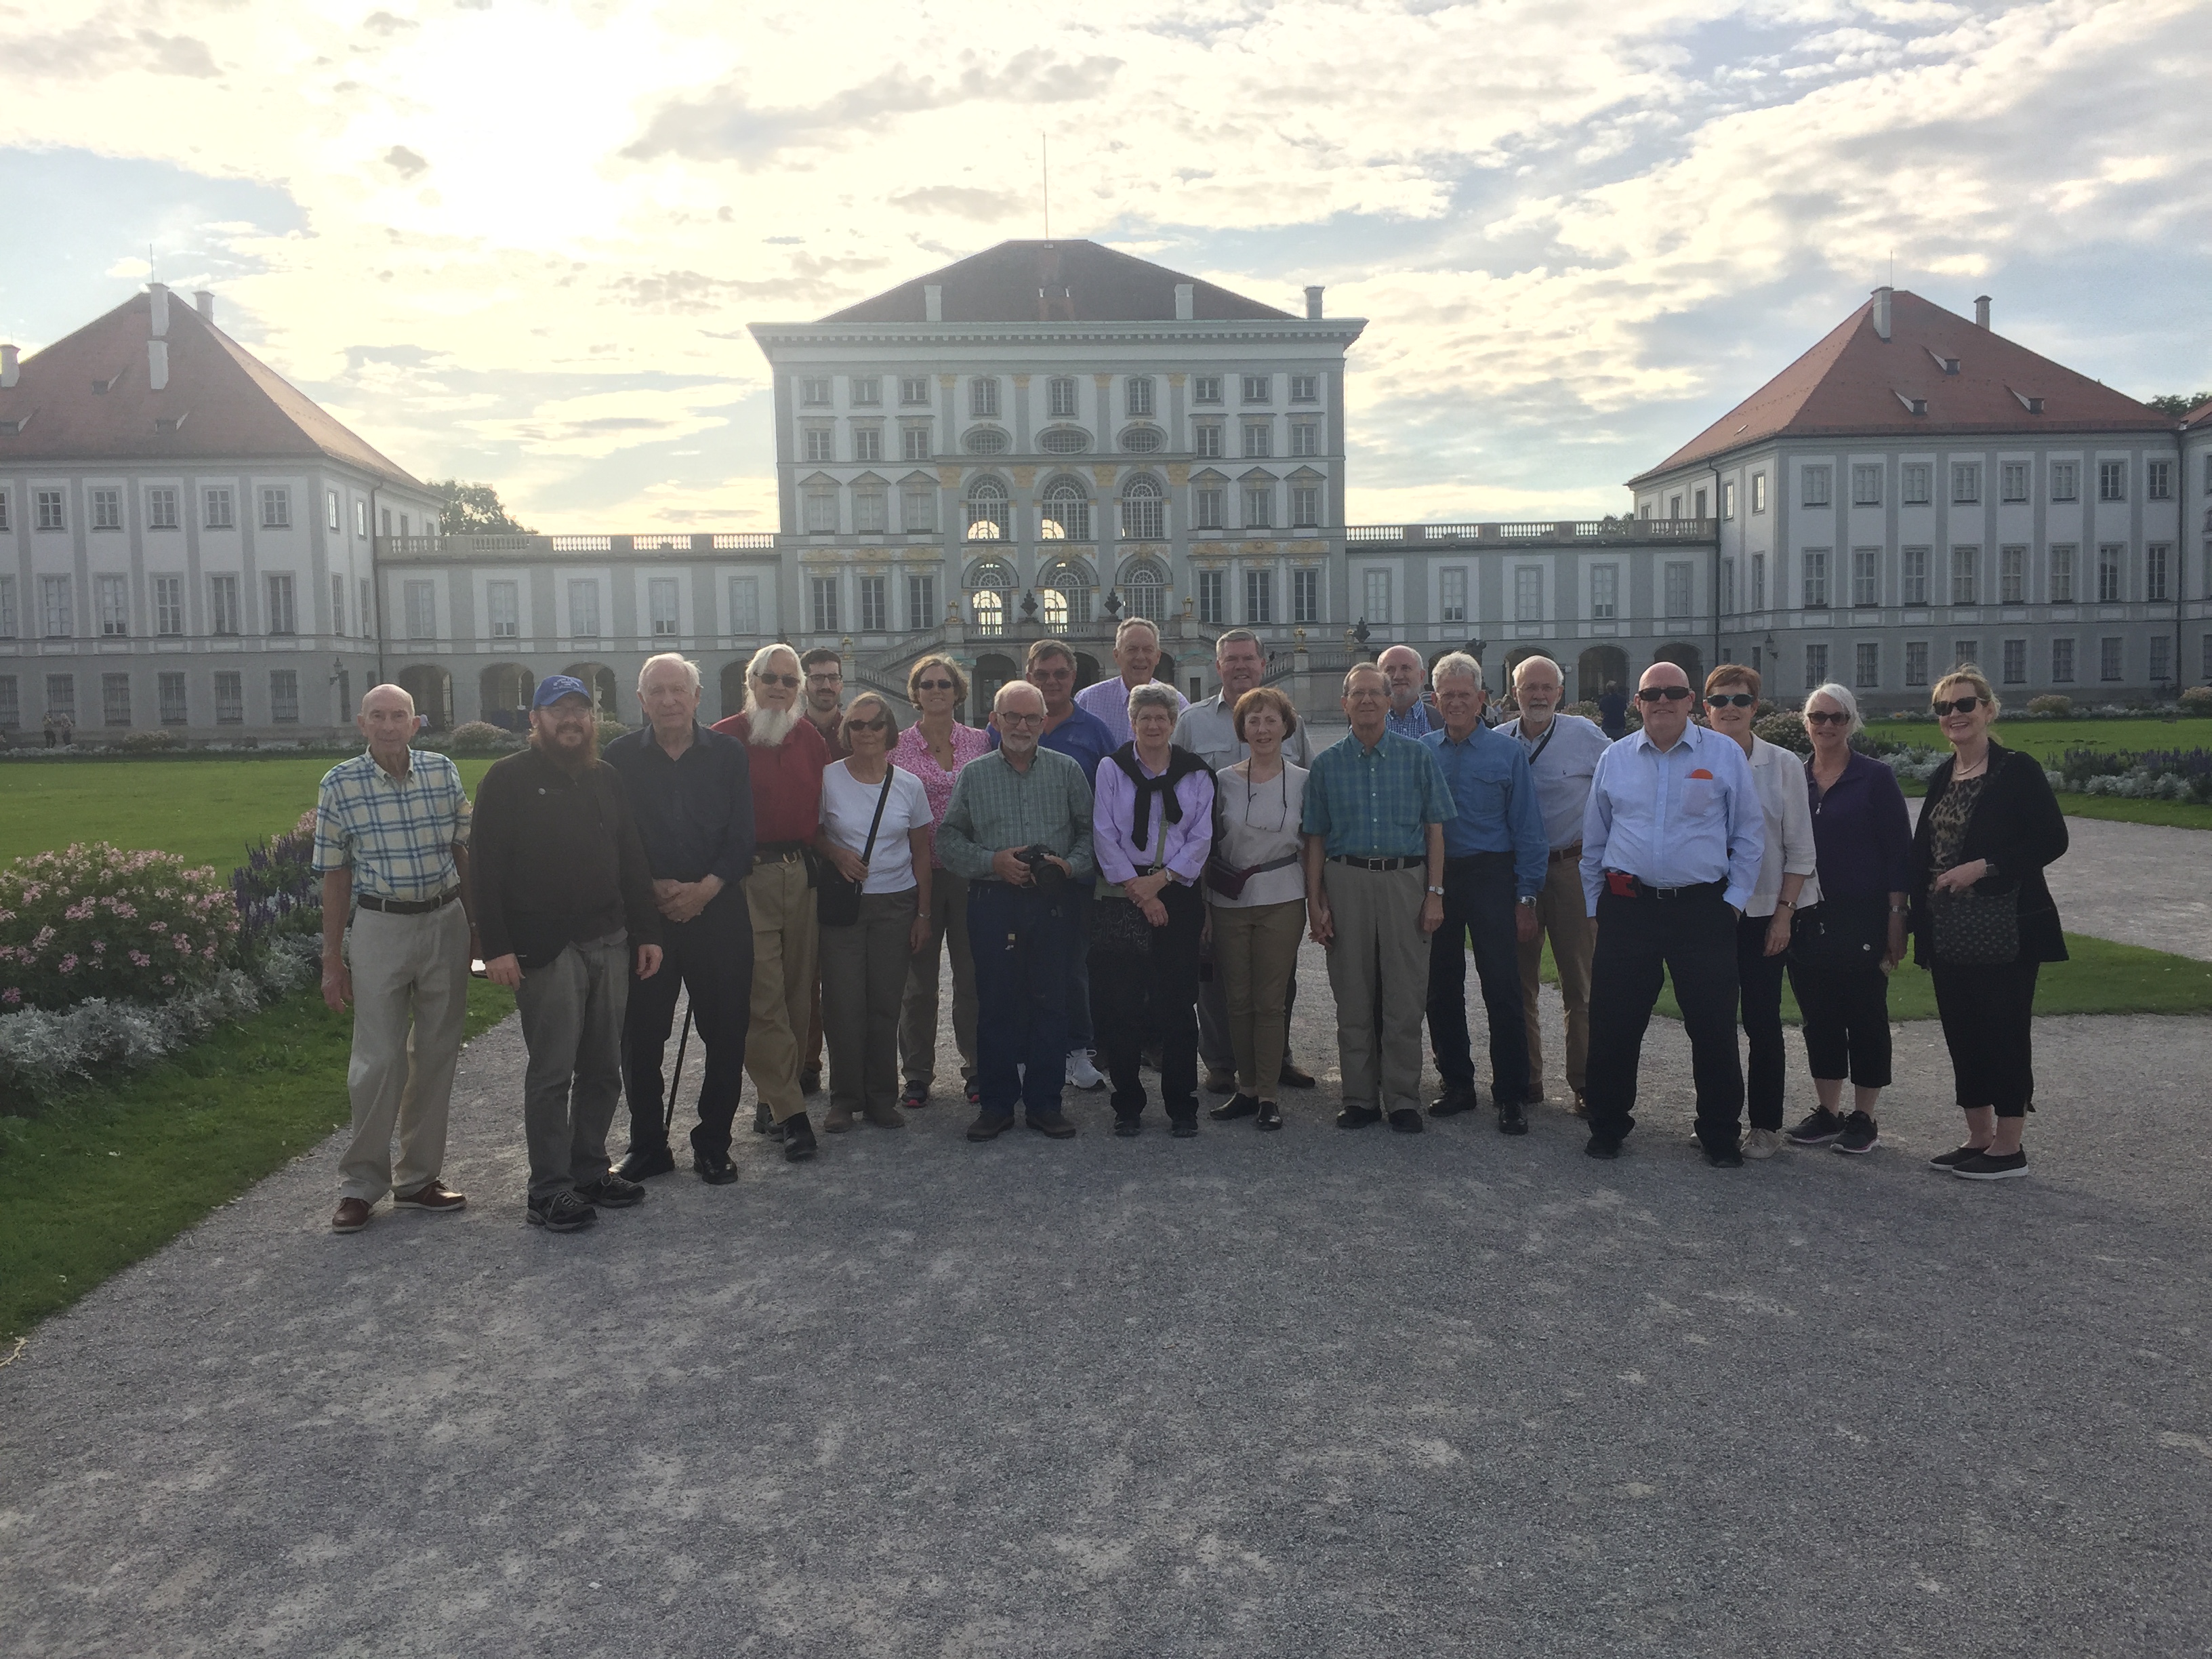 Group photo in front of the Nymphenburg Palace in Munich